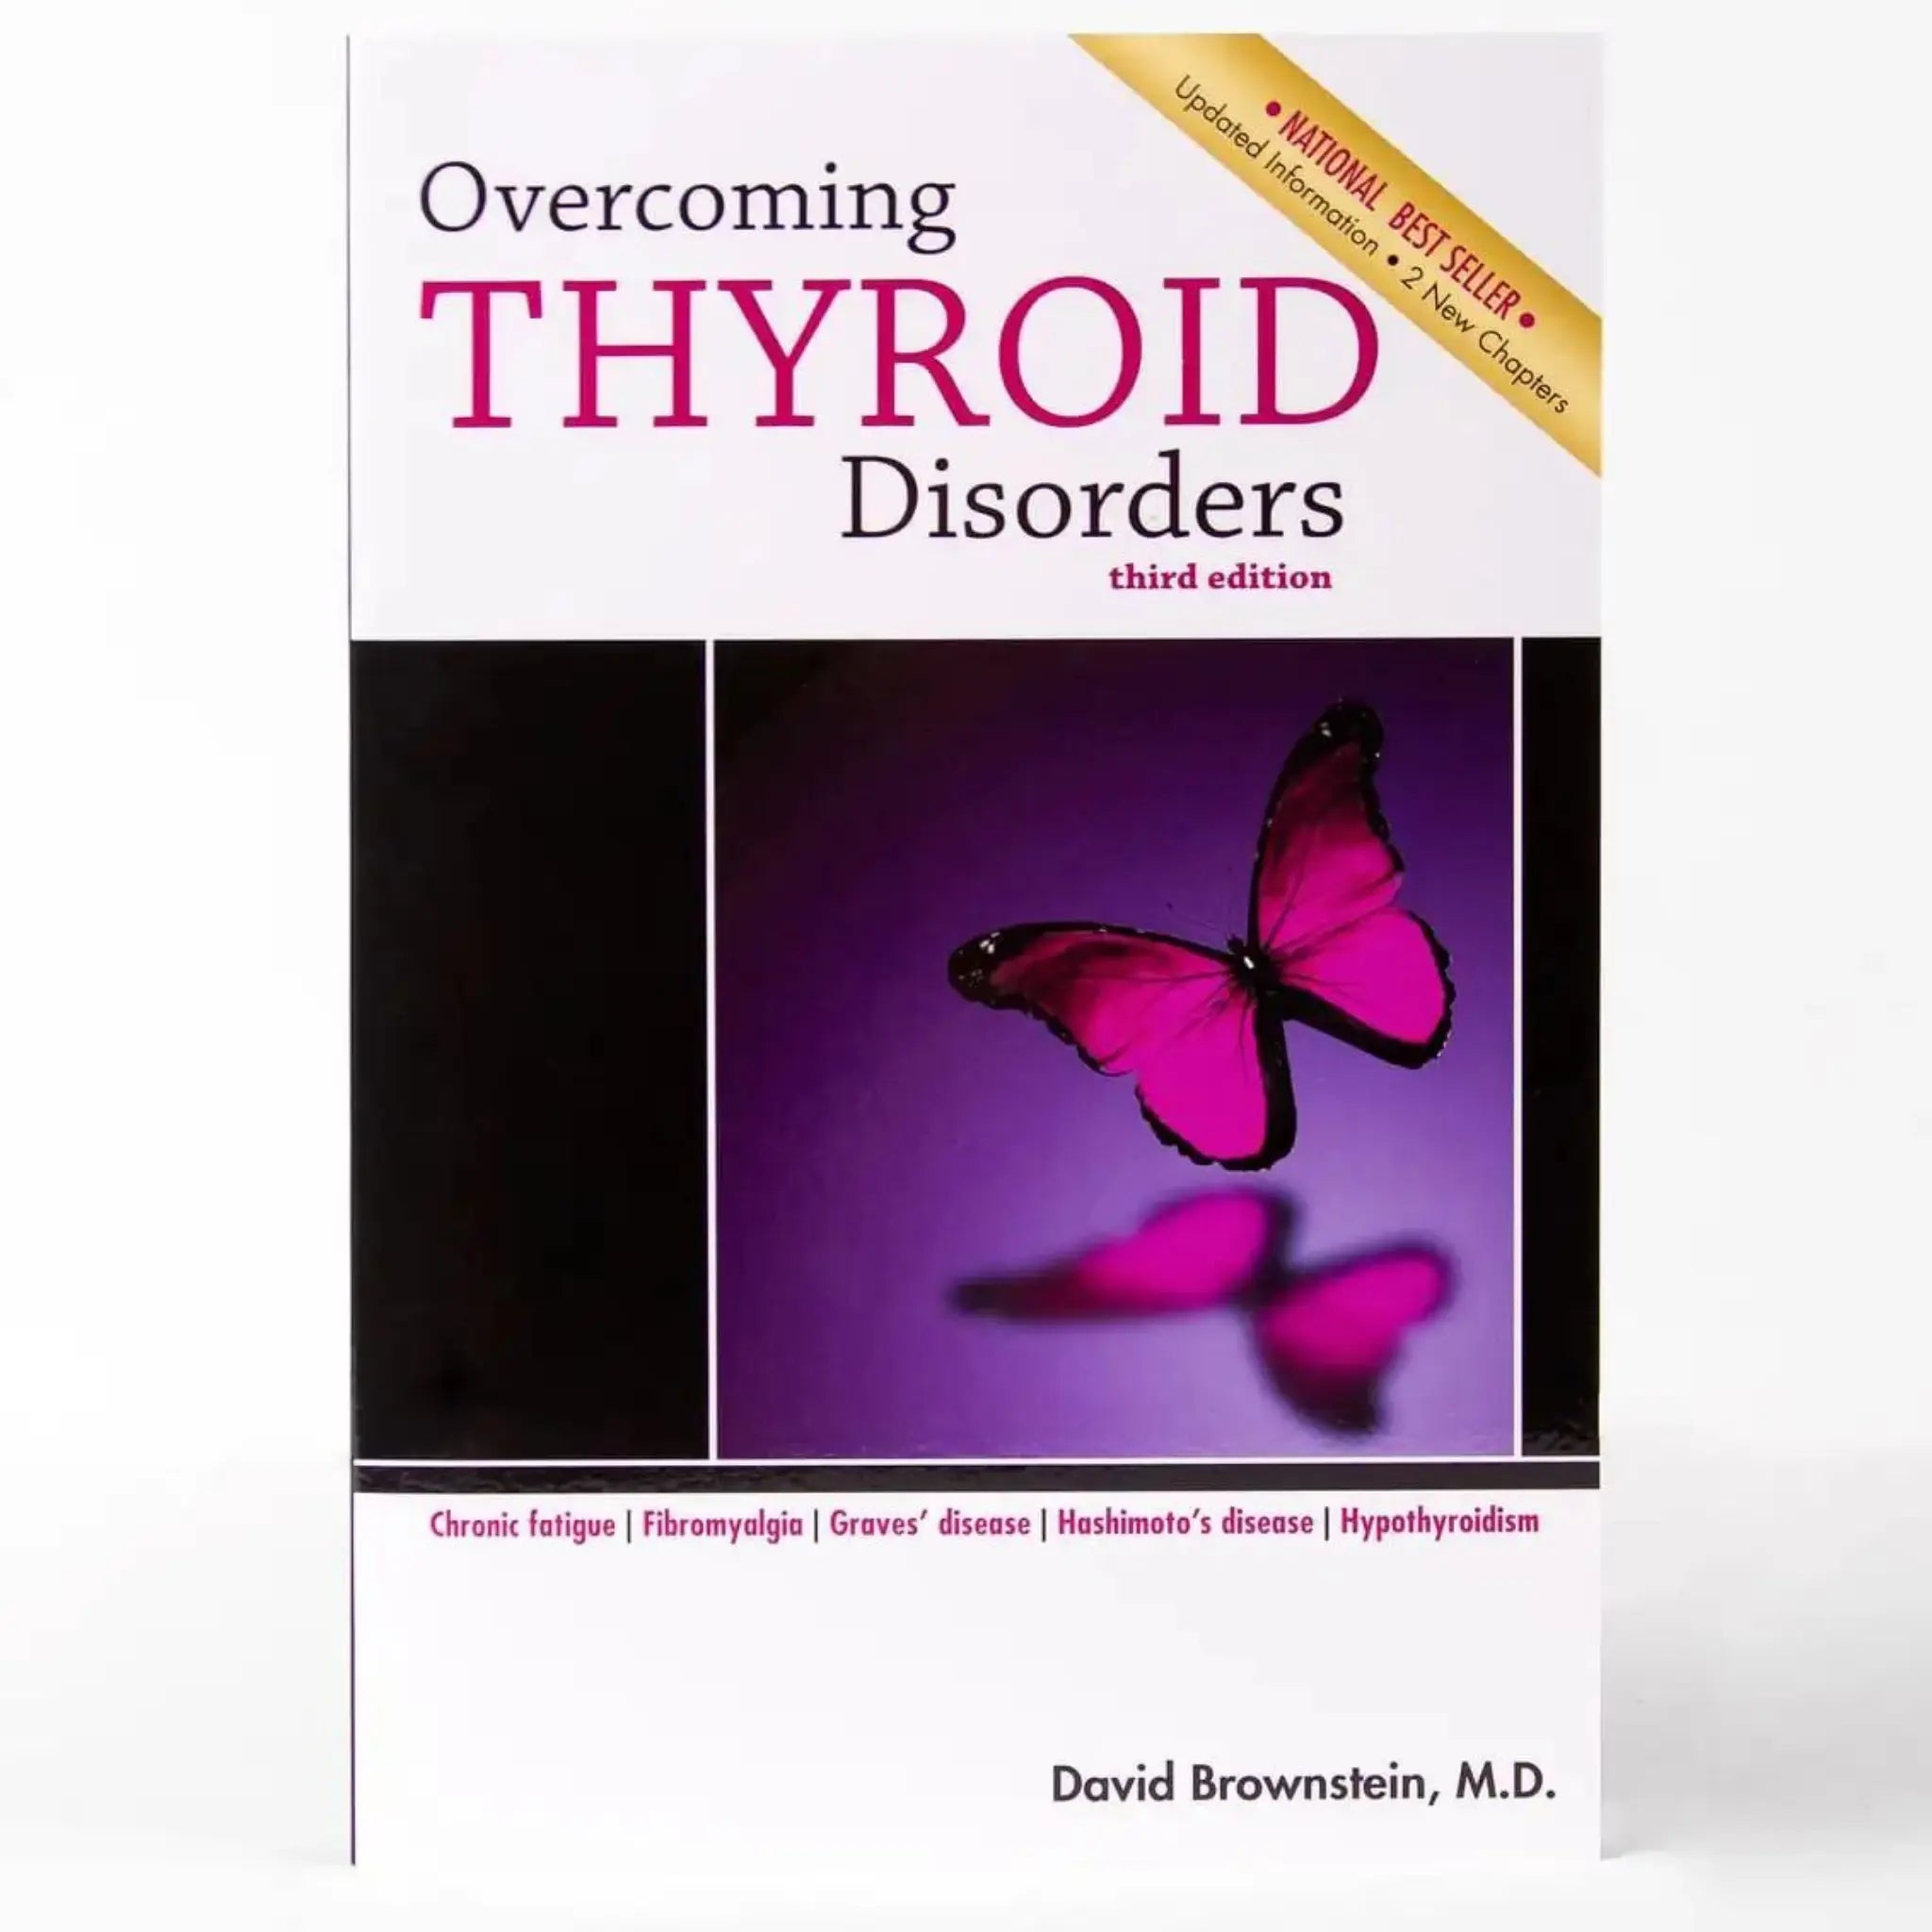 Overcoming Thyroid Disorders by Dr. Brownstein